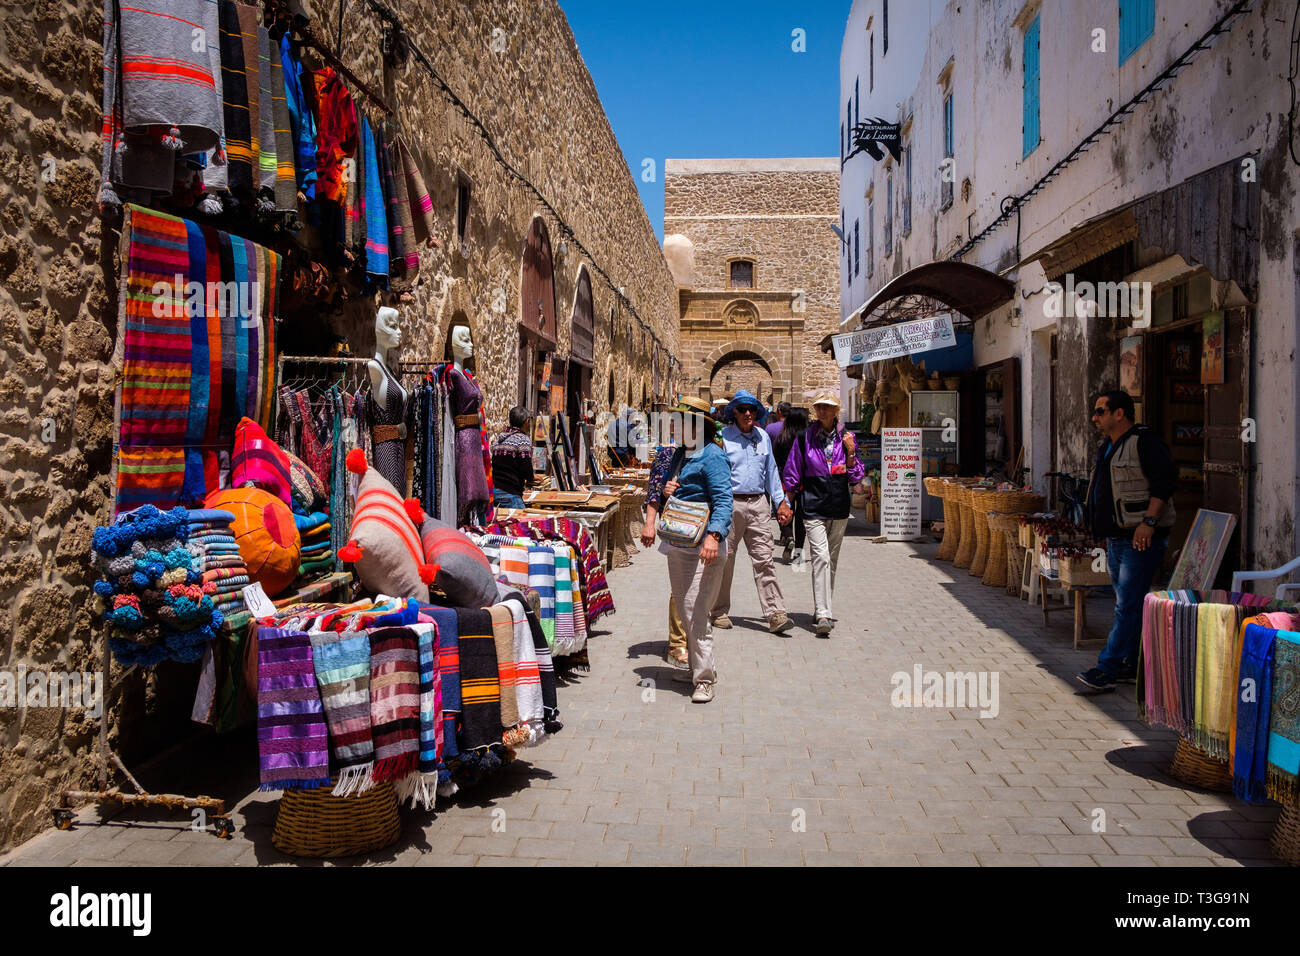 Morocco. Essaouria. City and port on the Atlantic coast of Morocco, with its medina registered as a UNESCO World Heritage Site. Shopping street and cr Stock Photo